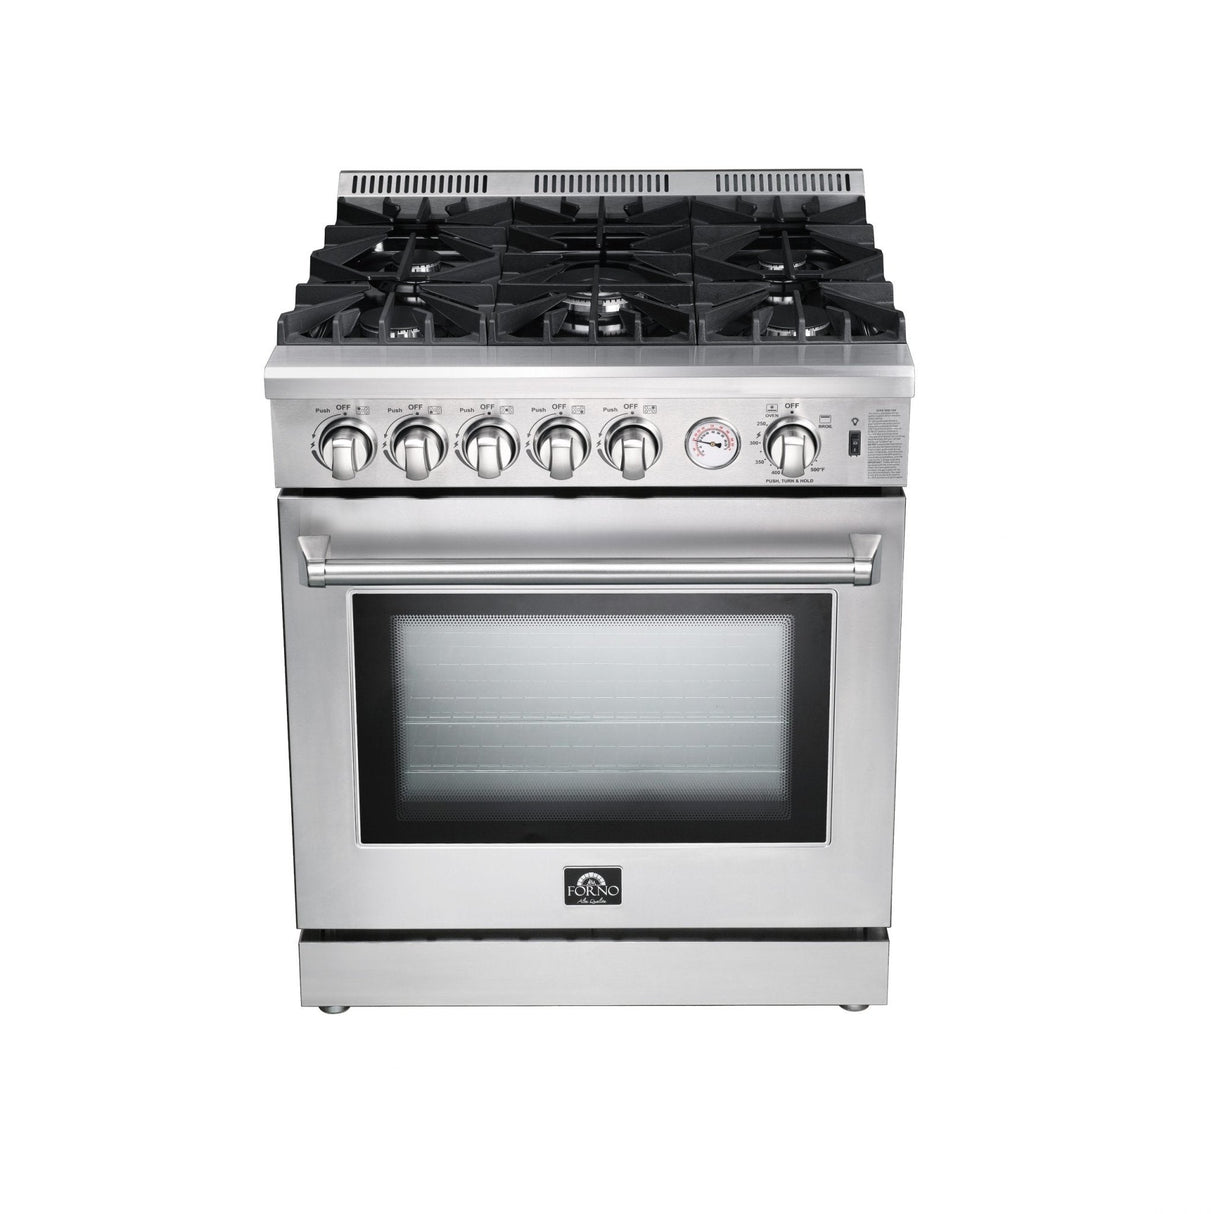 Forno 3-Piece Appliance Package - 30-Inch Gas Range, Pro-Style Refrigerator, and Dishwasher in Stainless Steel